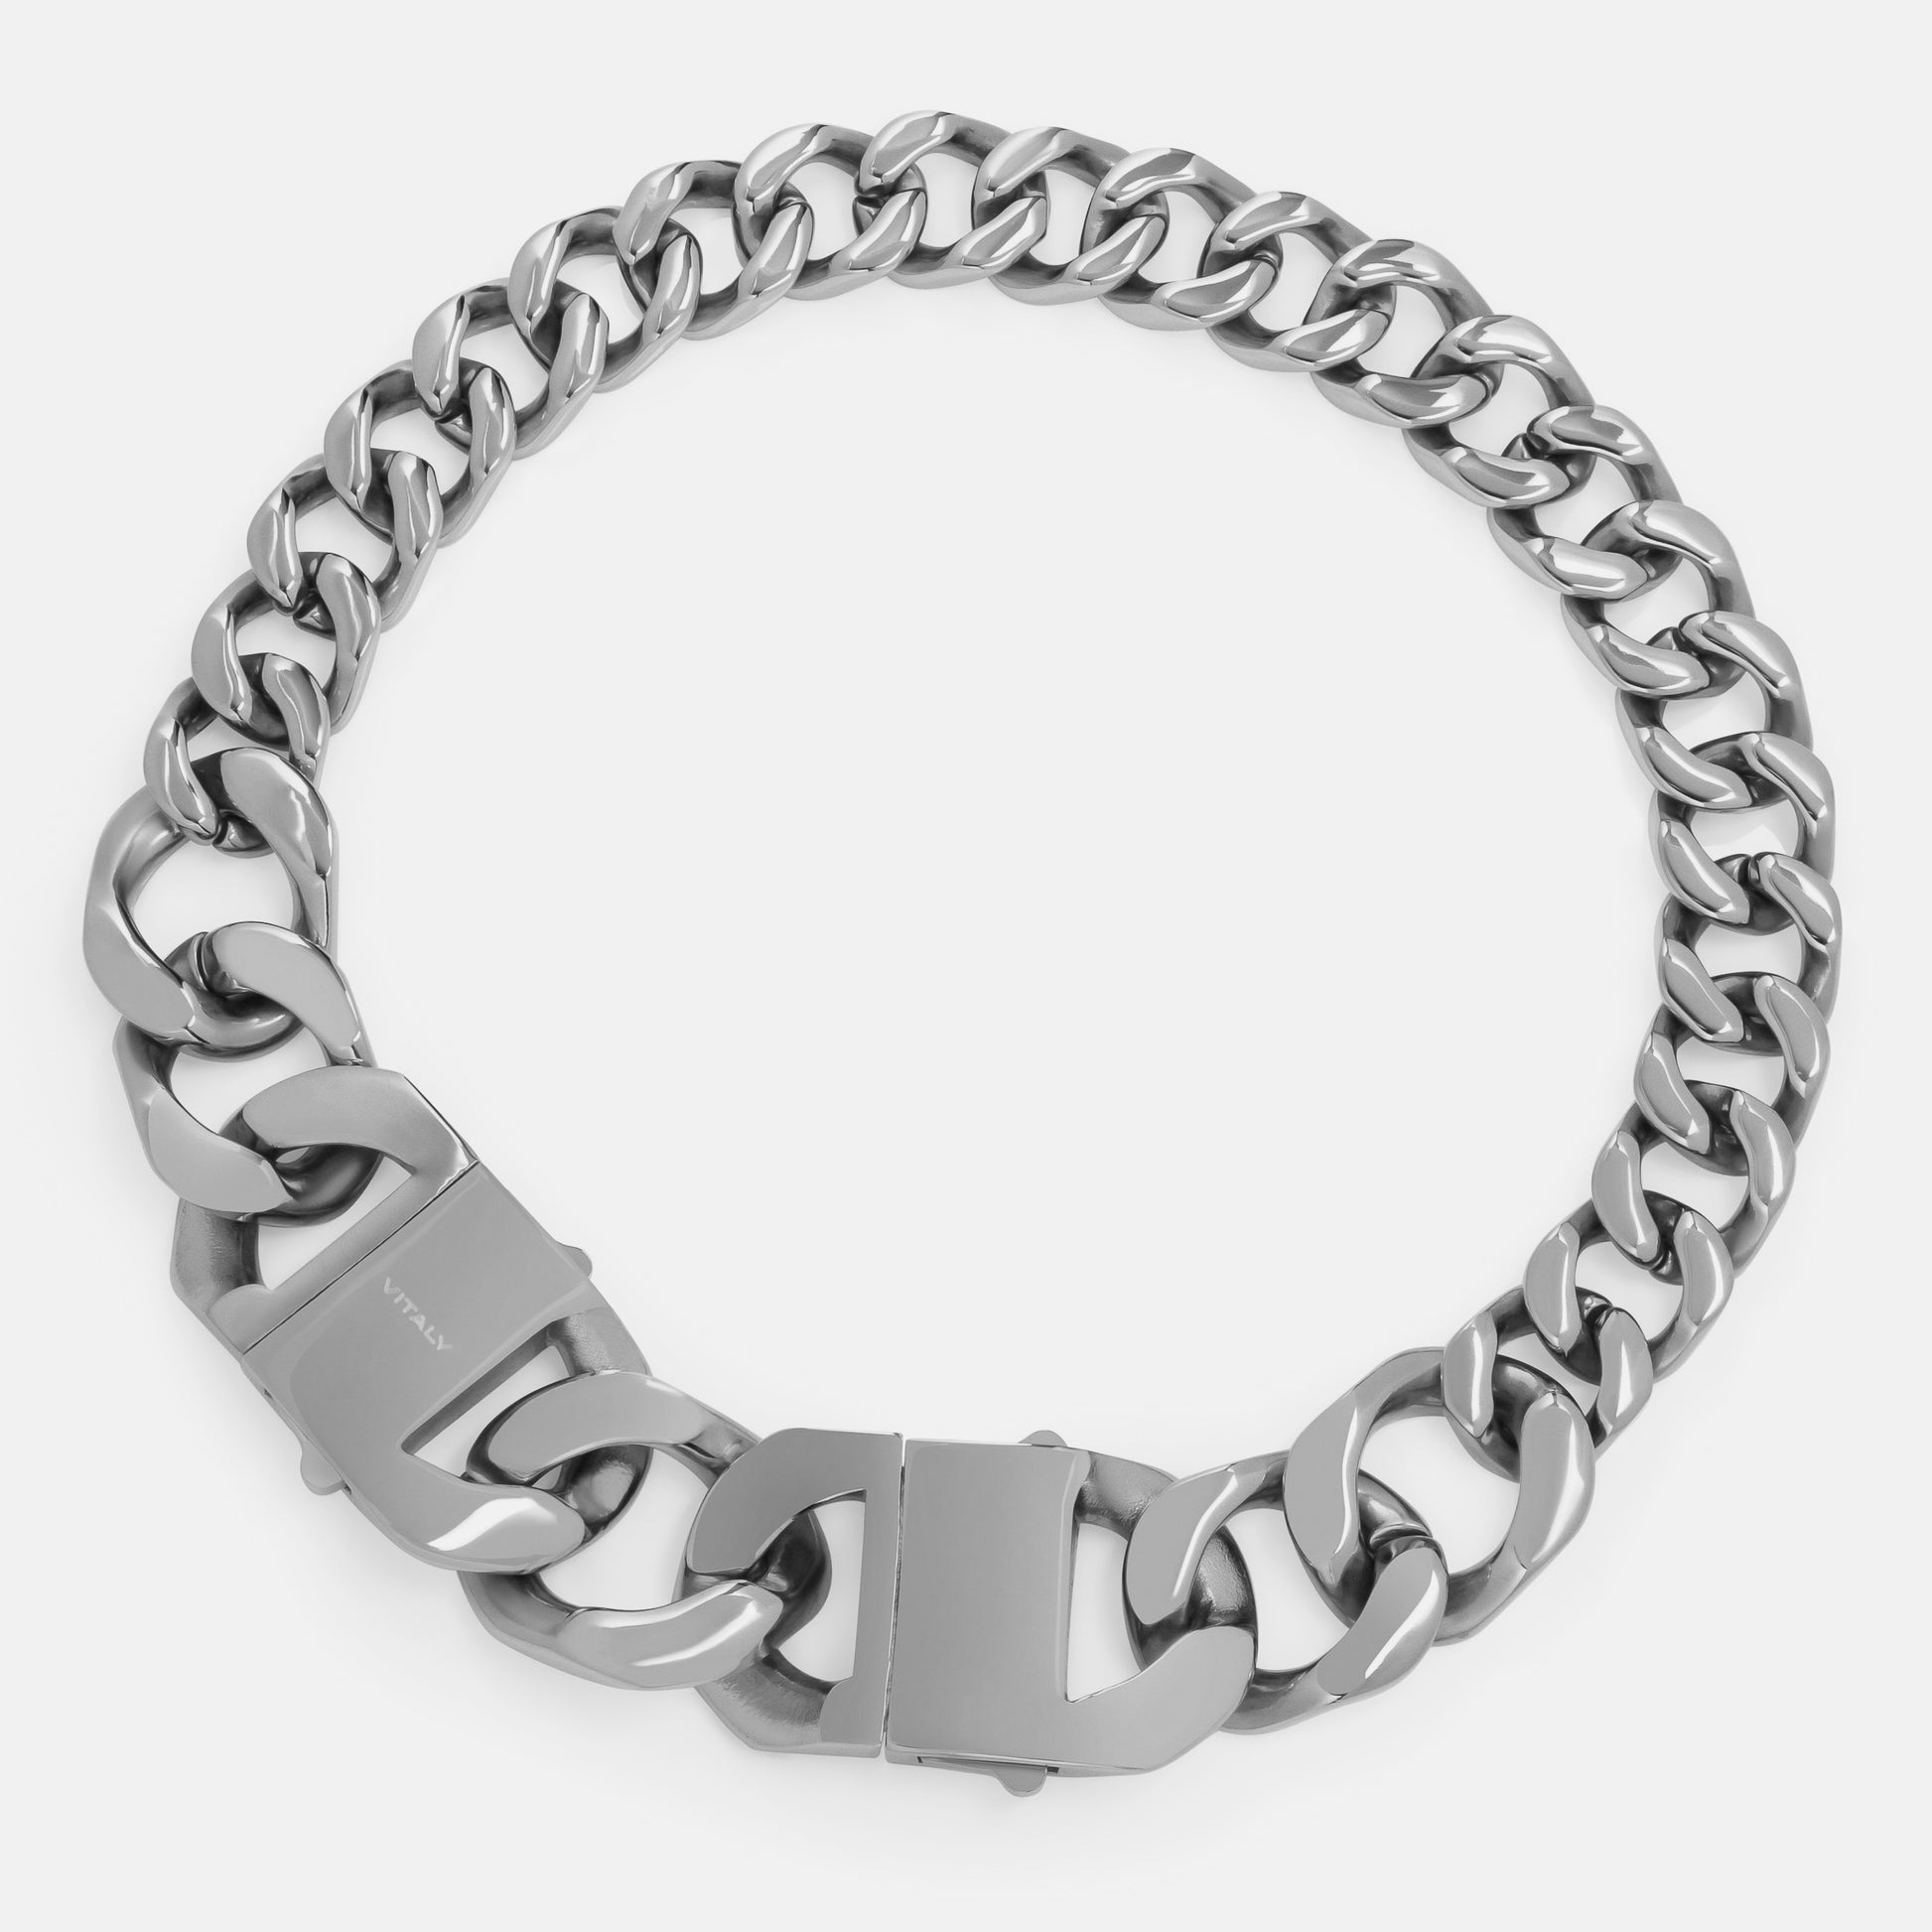 Vitaly Fuse Choker Chain  100% Recycled Stainless Steel Accessories